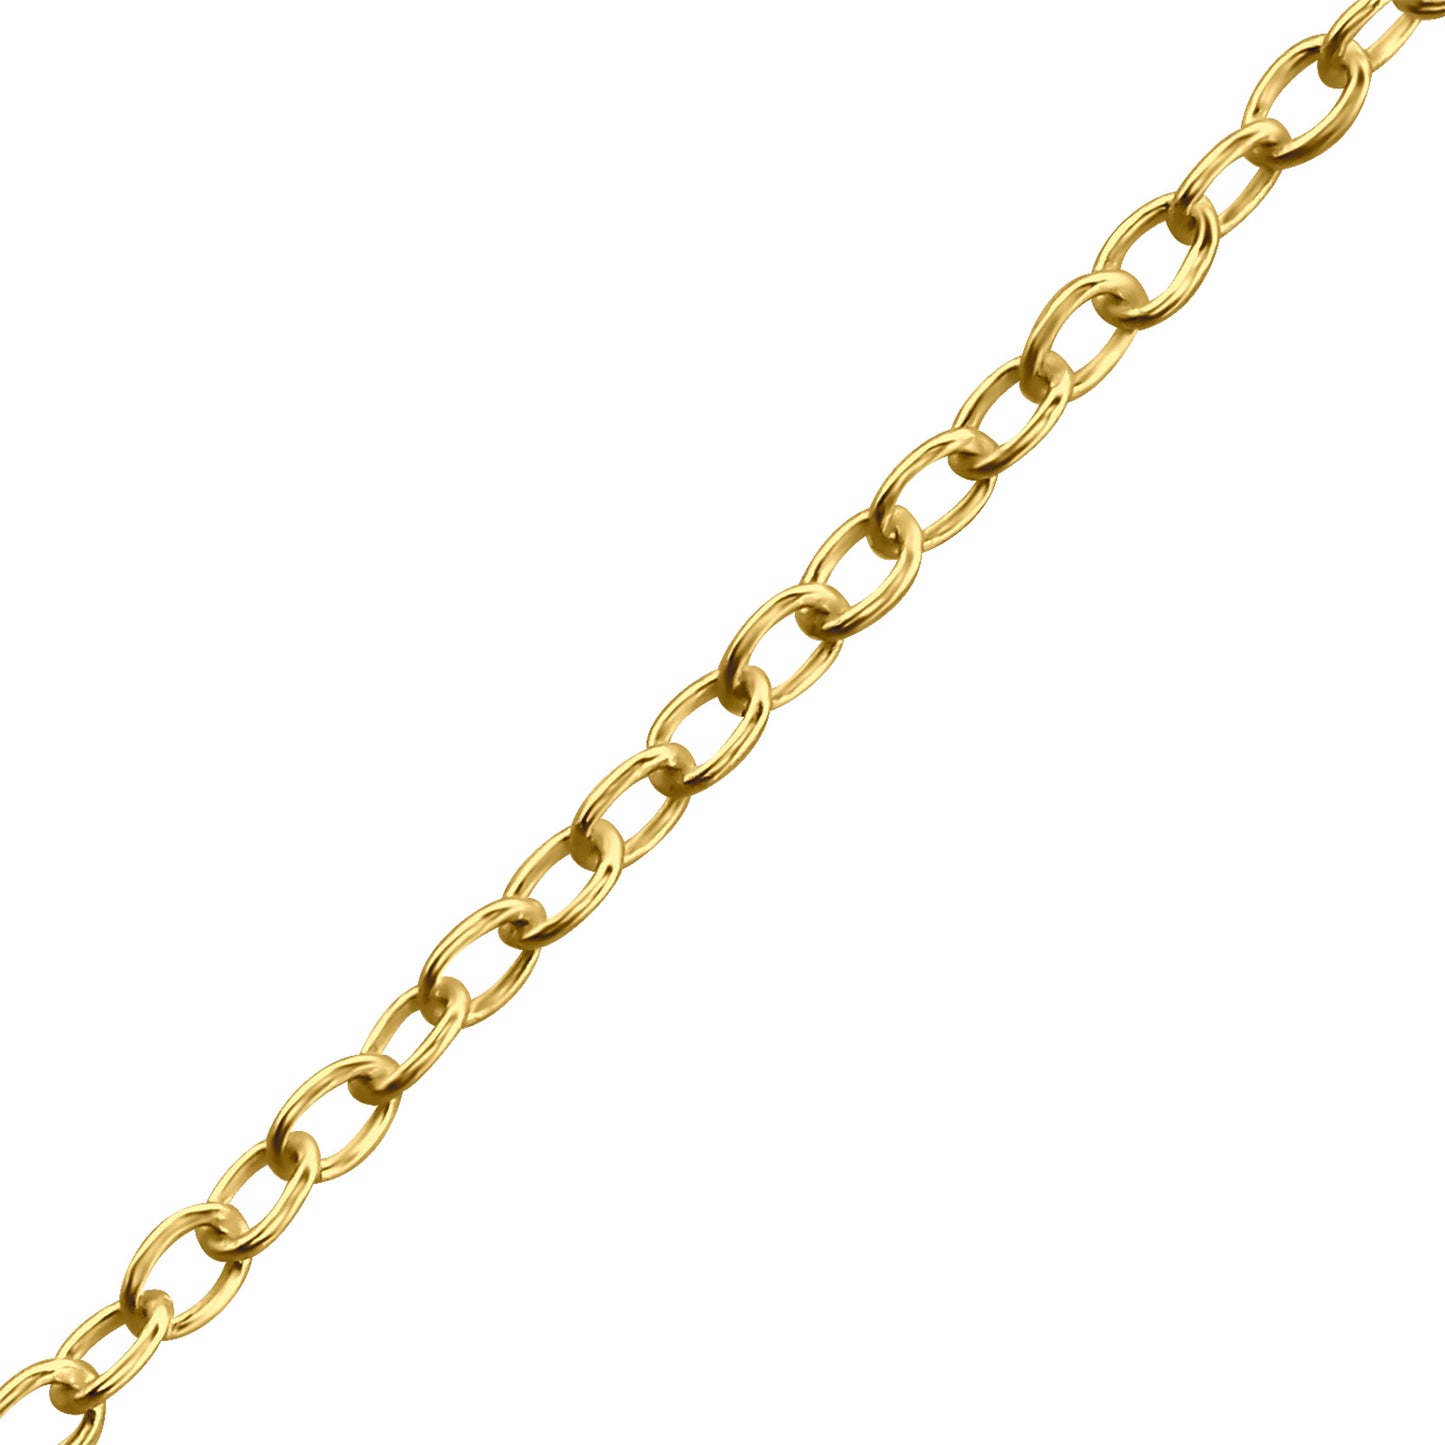 REAL GOLD PLATED THIN CABLE CHAIN - Sterling Silver (45cm)